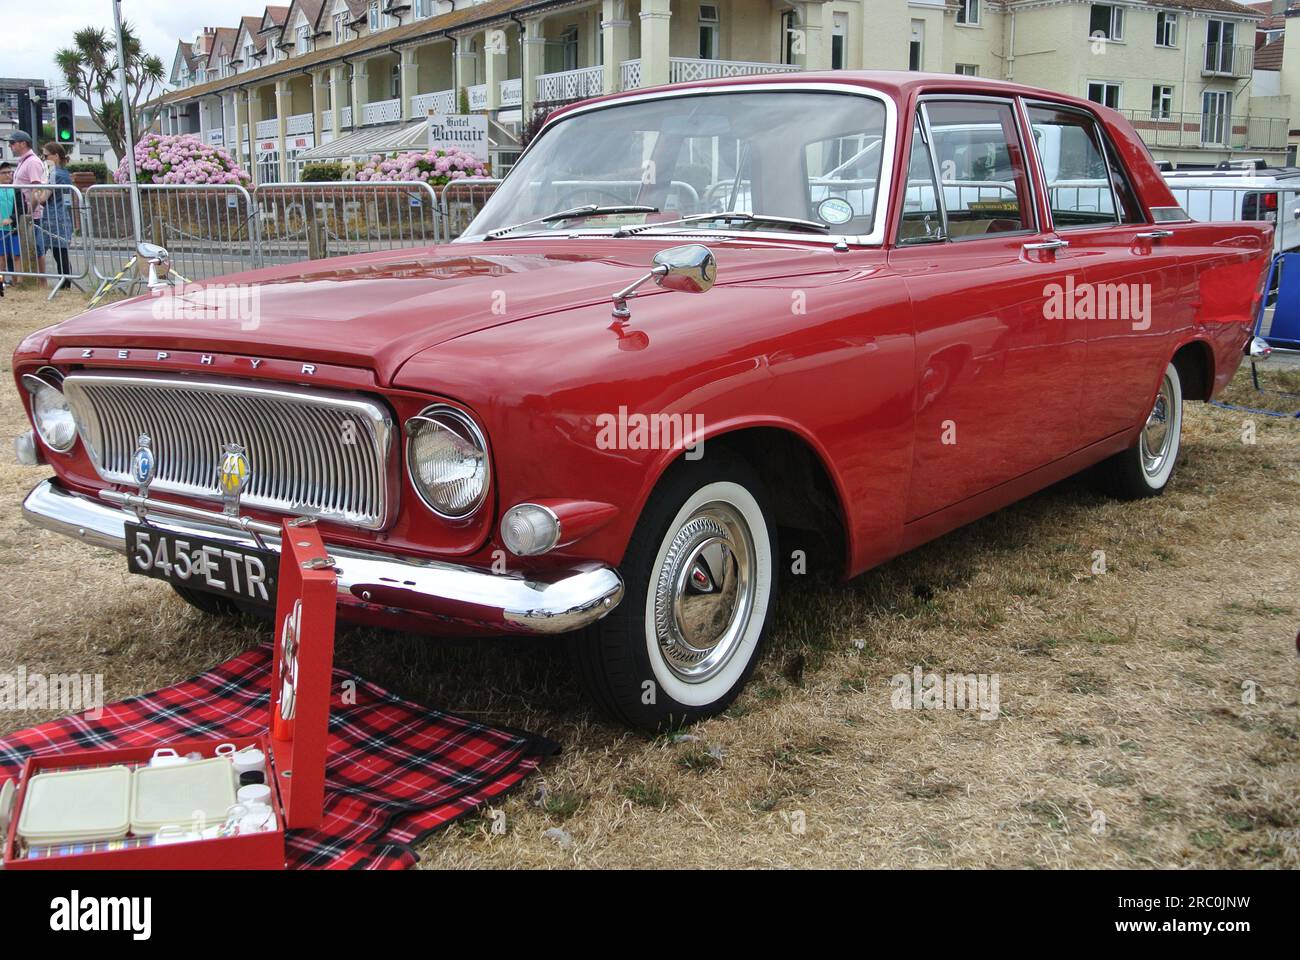 A 1963 Ford Zephyr 4 Mk3 parked on display at the English Riviera classic car show, Paignton, Devon, England, UK. Stock Photo